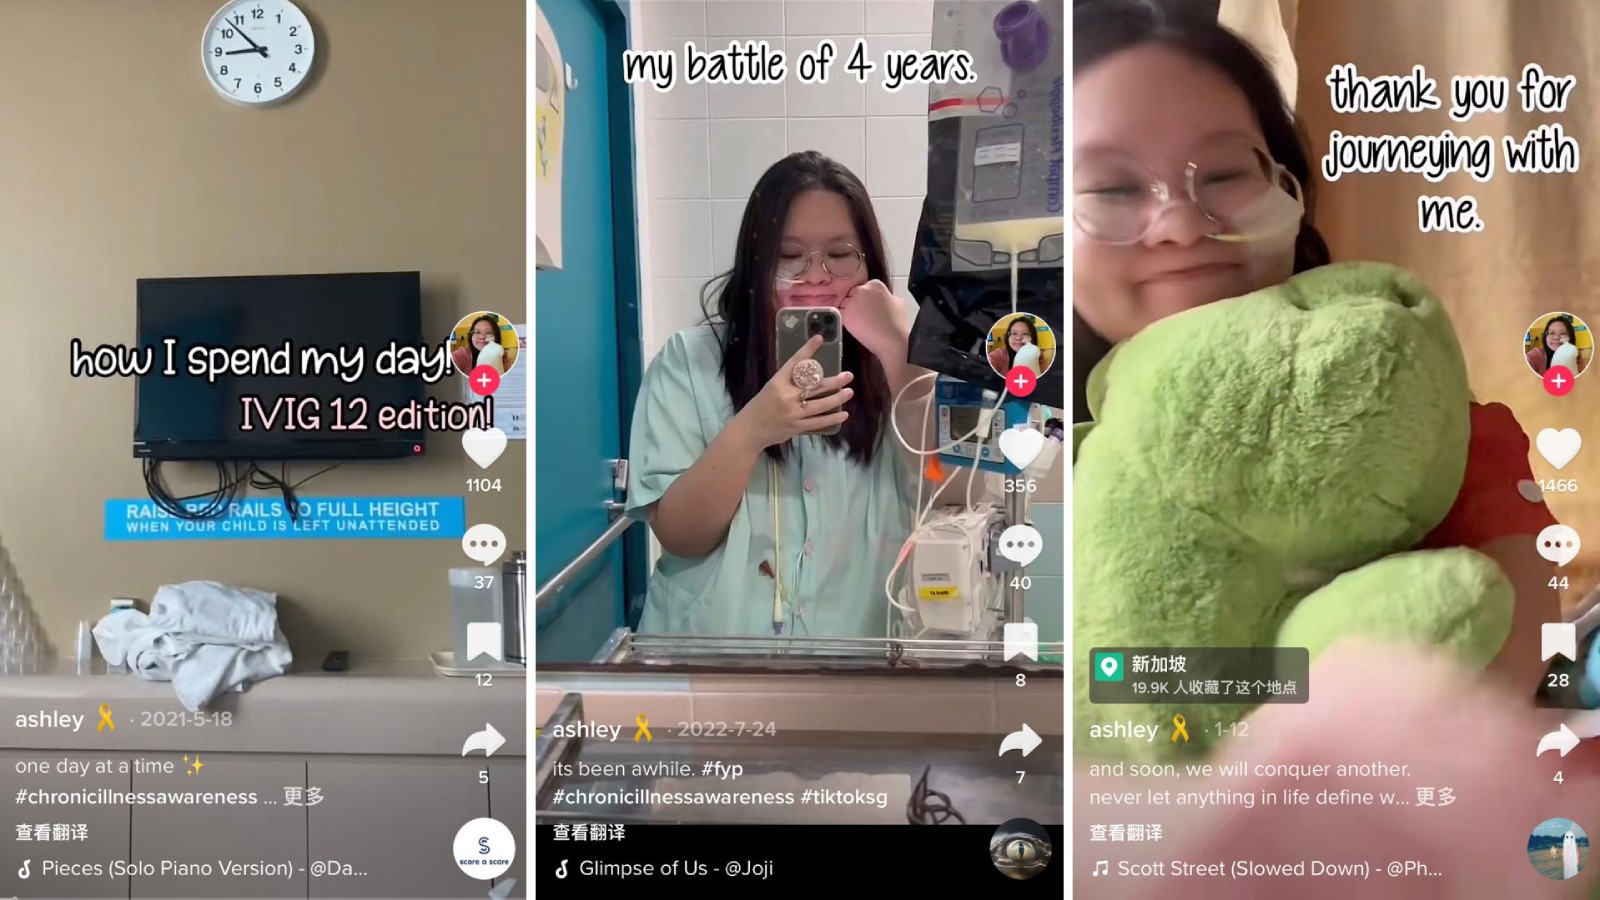 Post thumbnail of “I’m almost constantly in pain”: Teen turns to TikTok to share her 4-year battle with rare chronic disorders